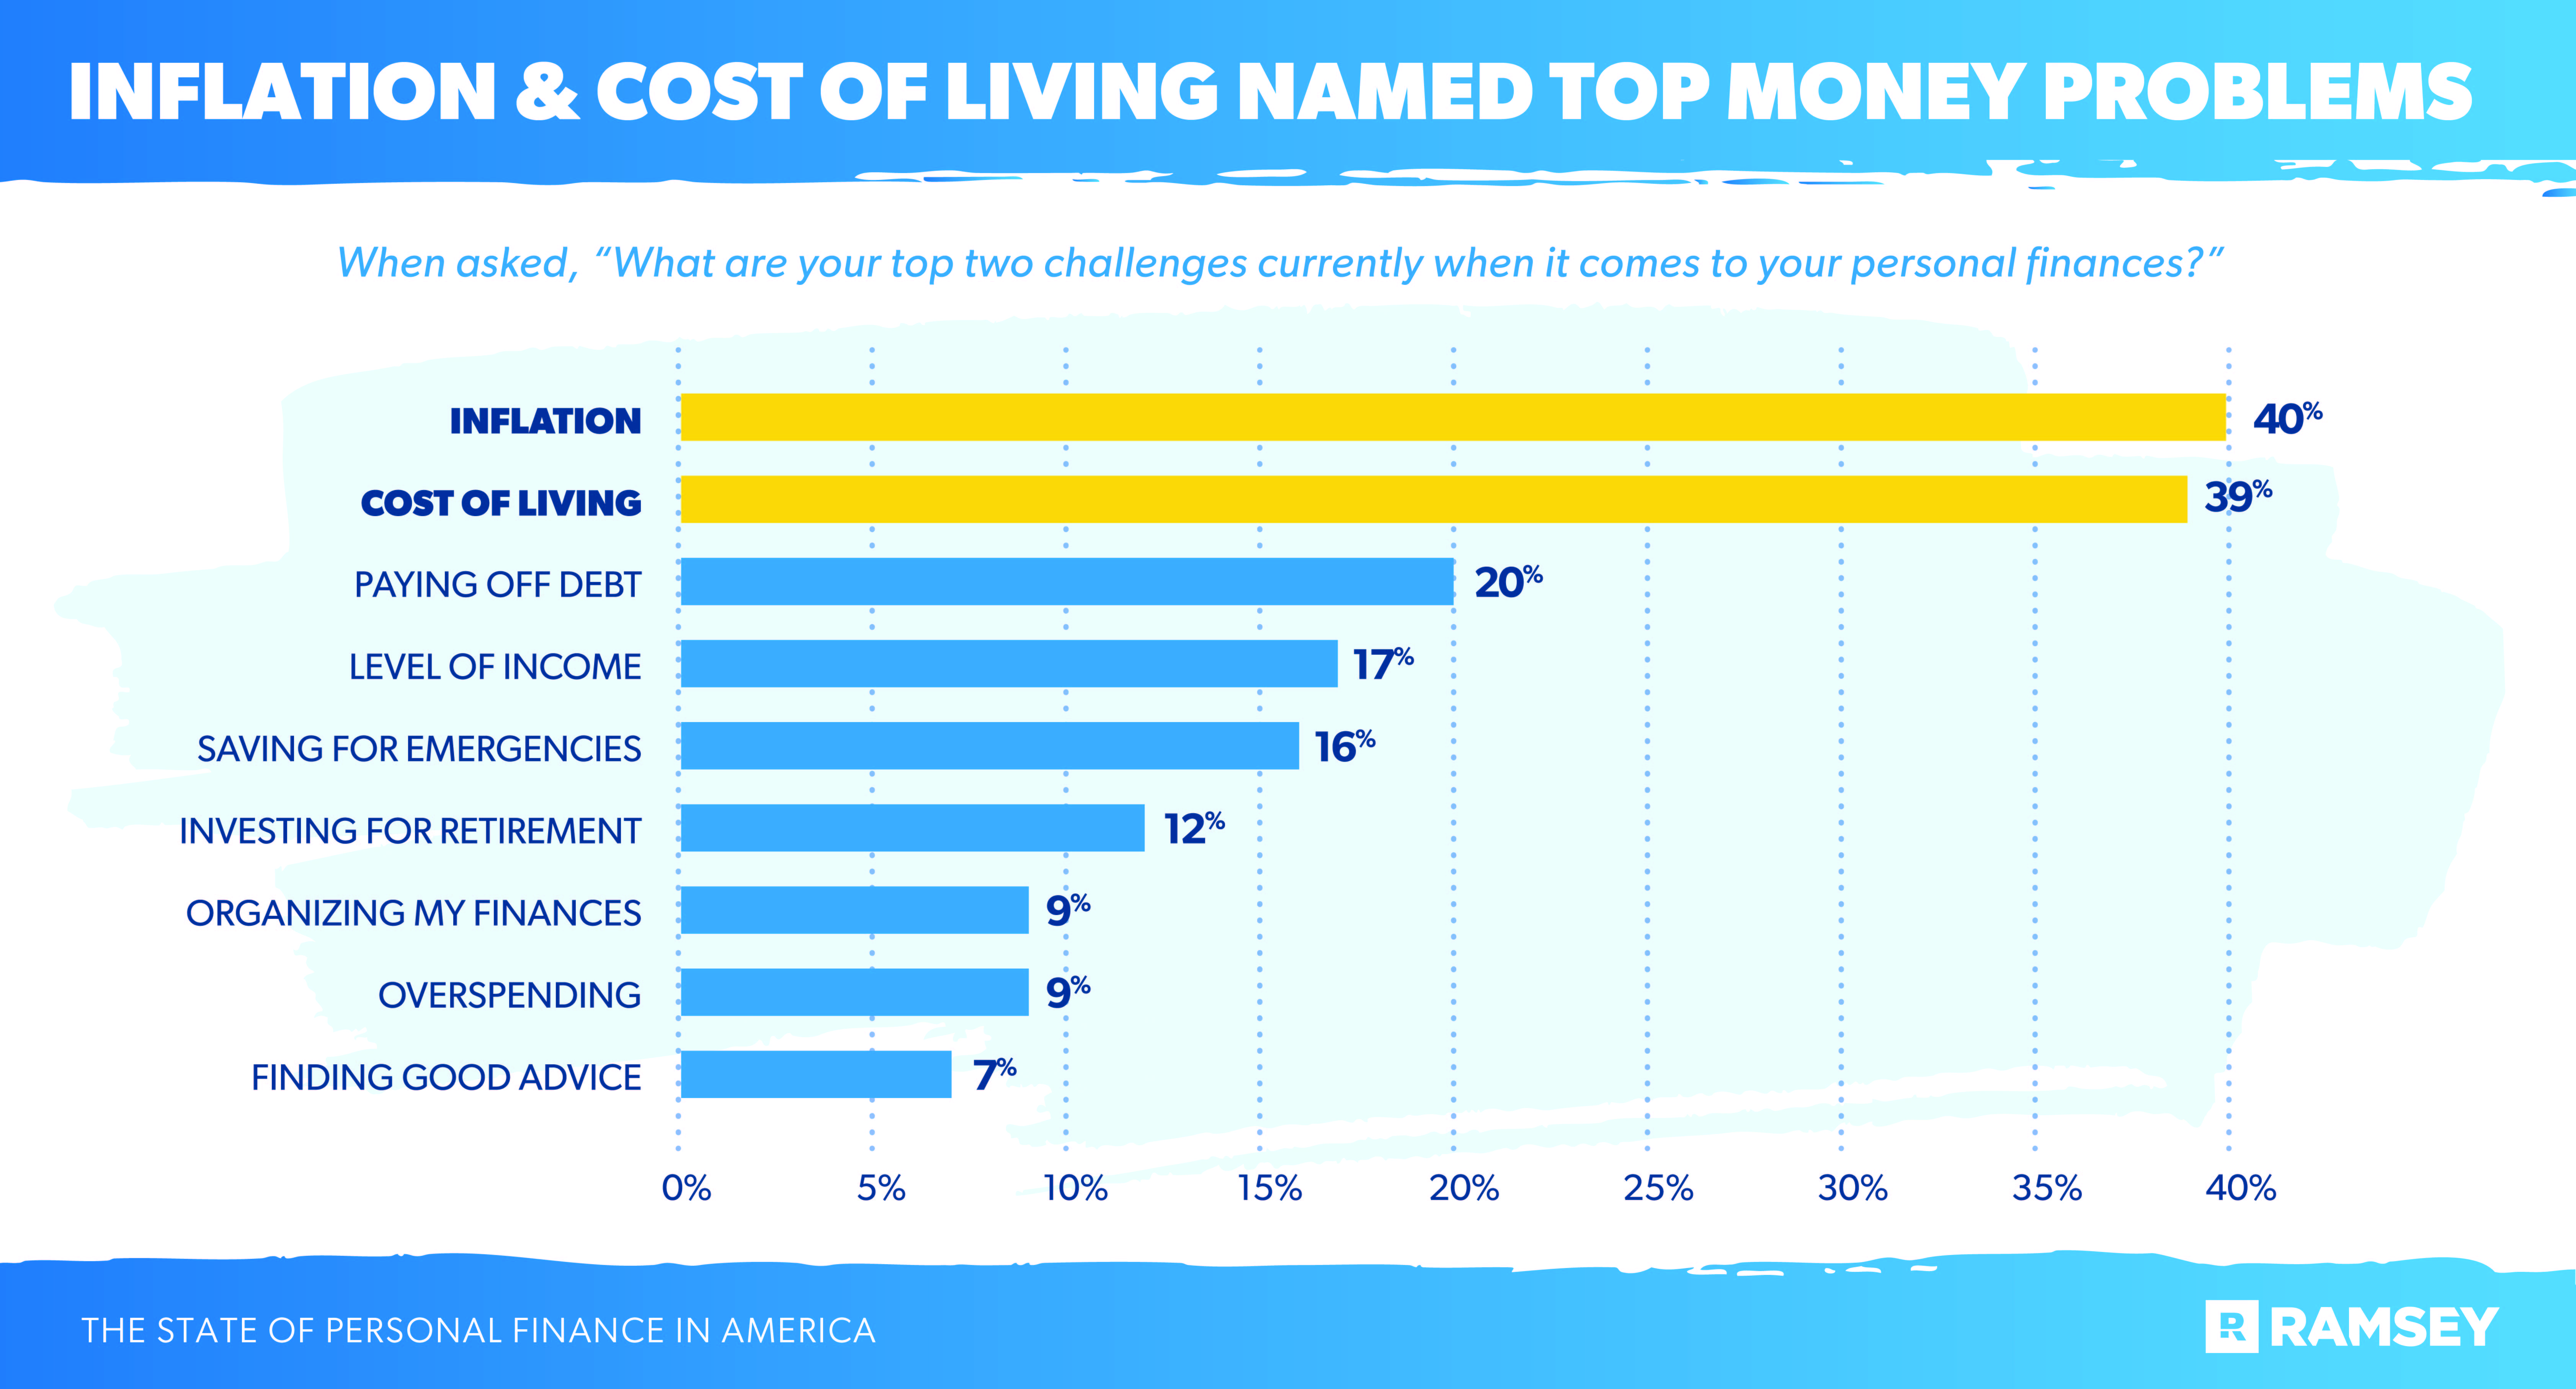 Inflation & Cost of Living Named Top Money Problems